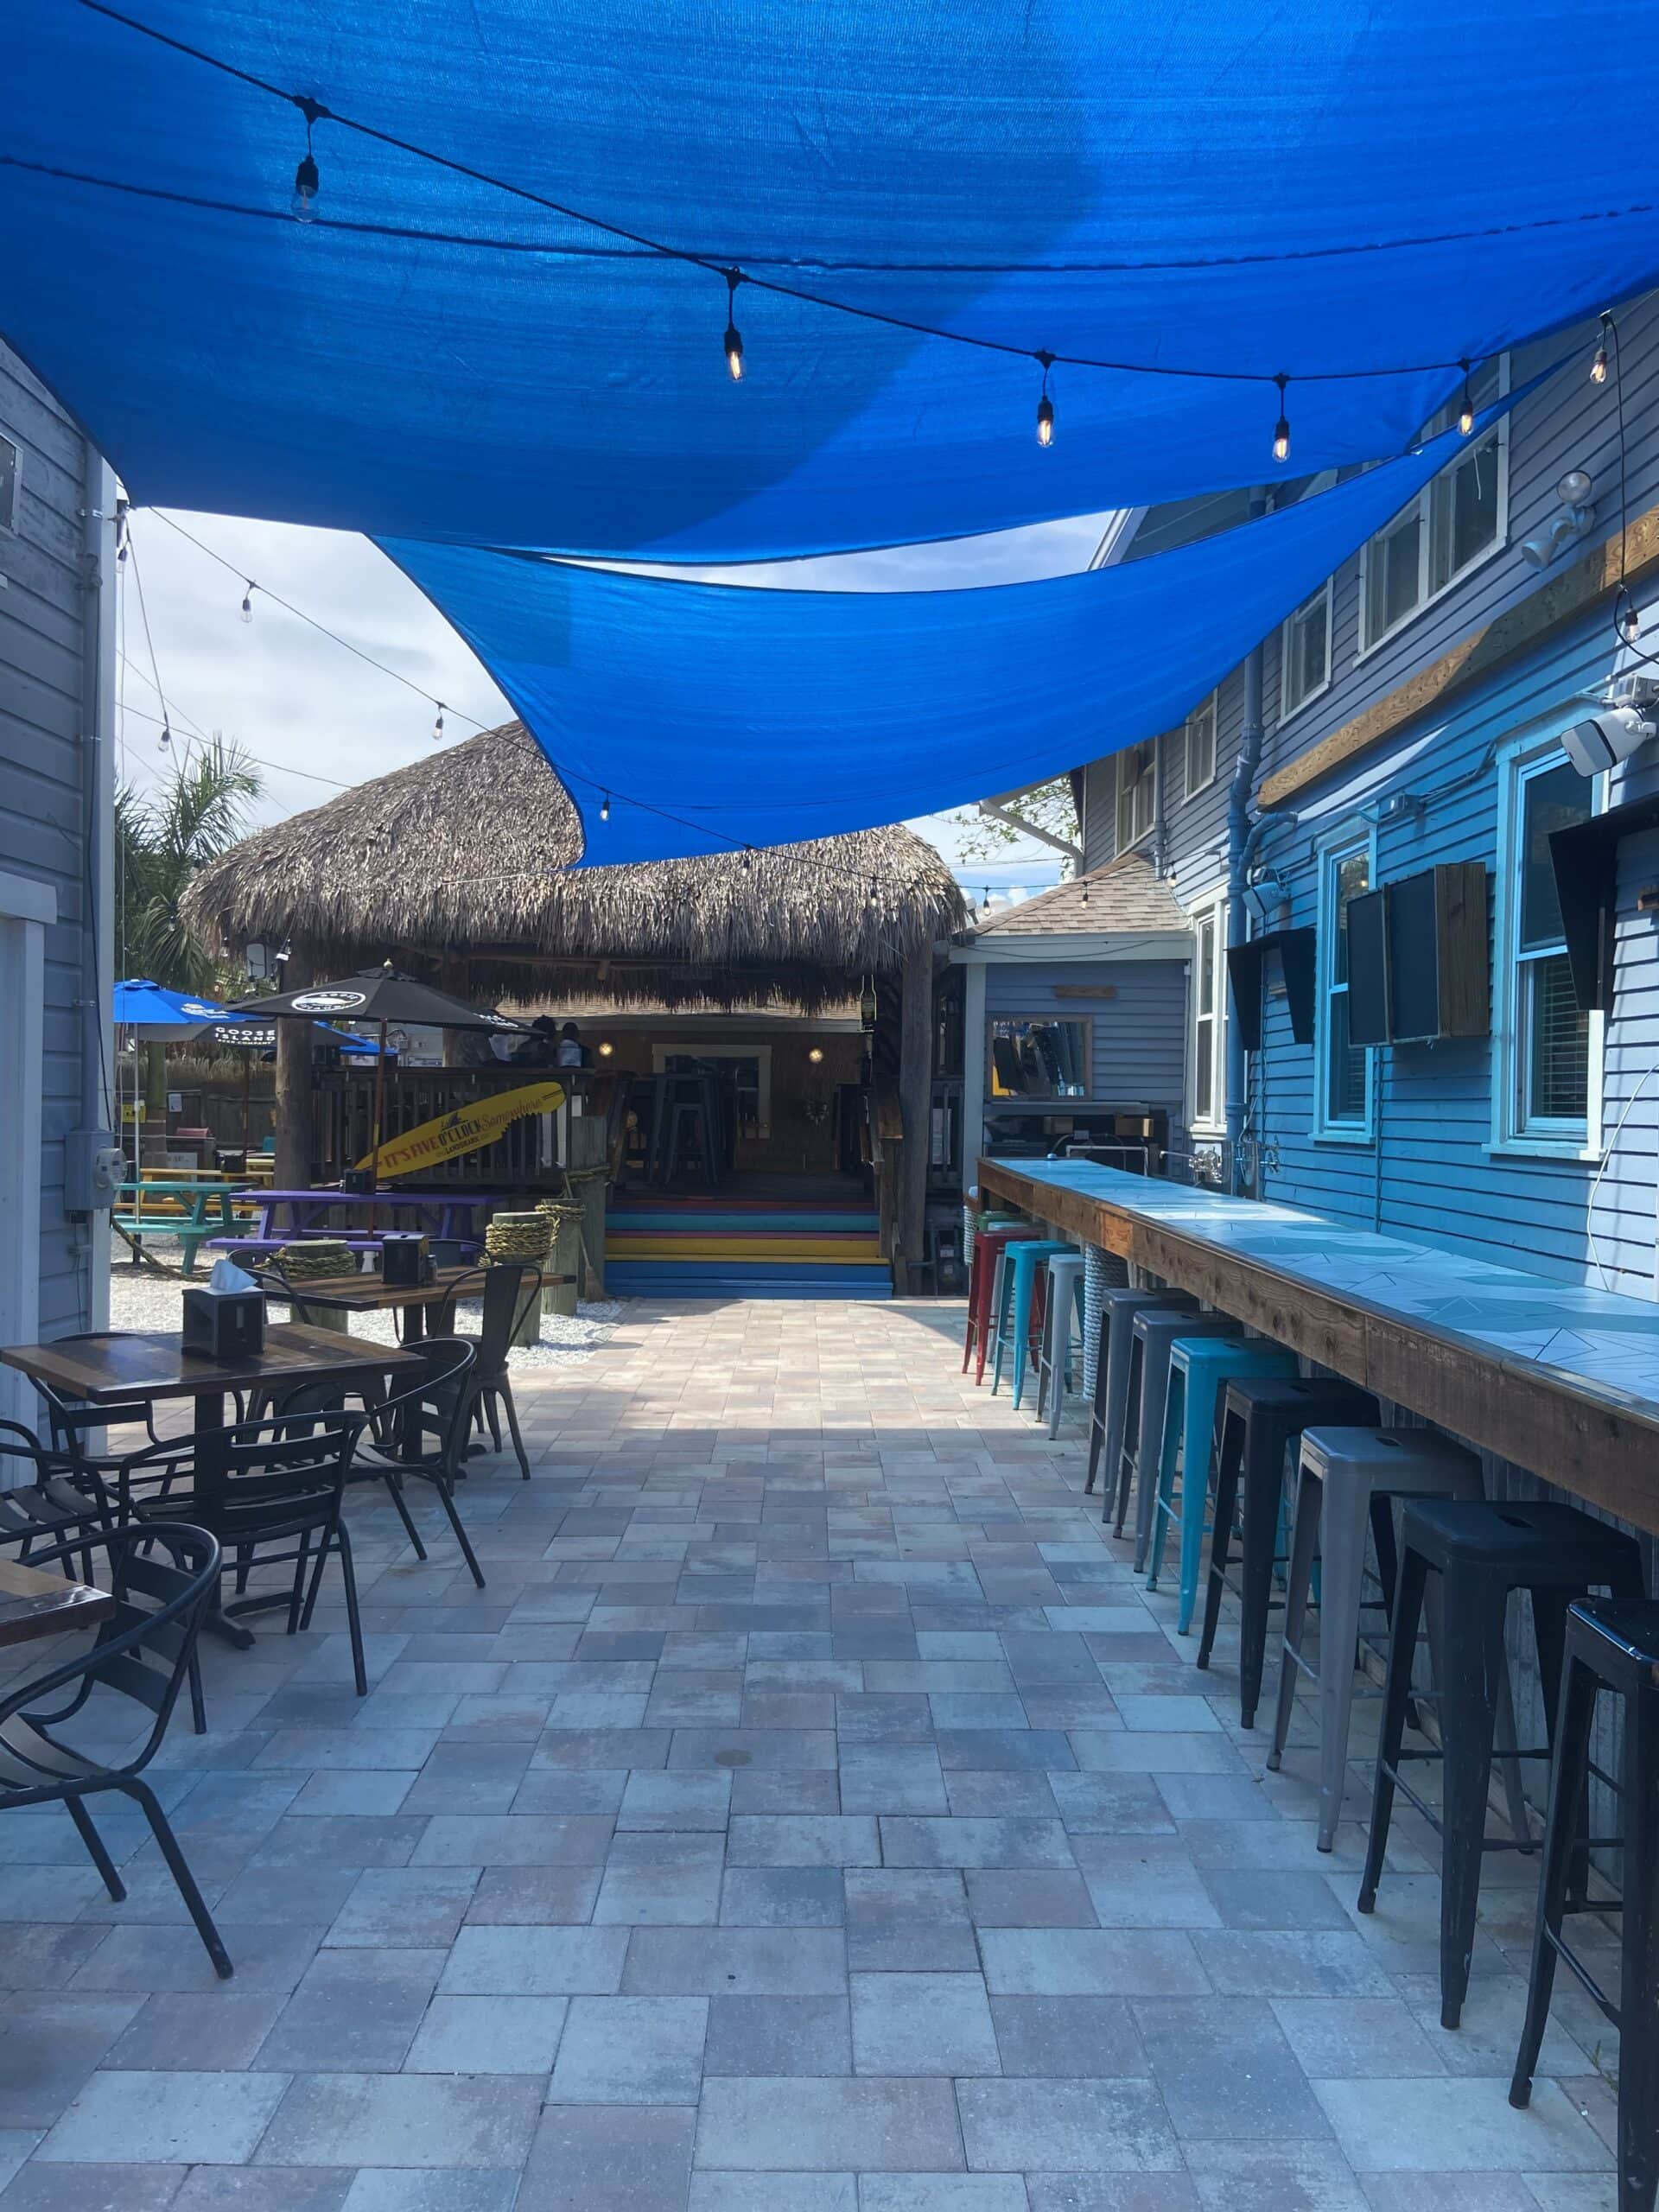 Patio and entrance to Mullet's tiki bar.